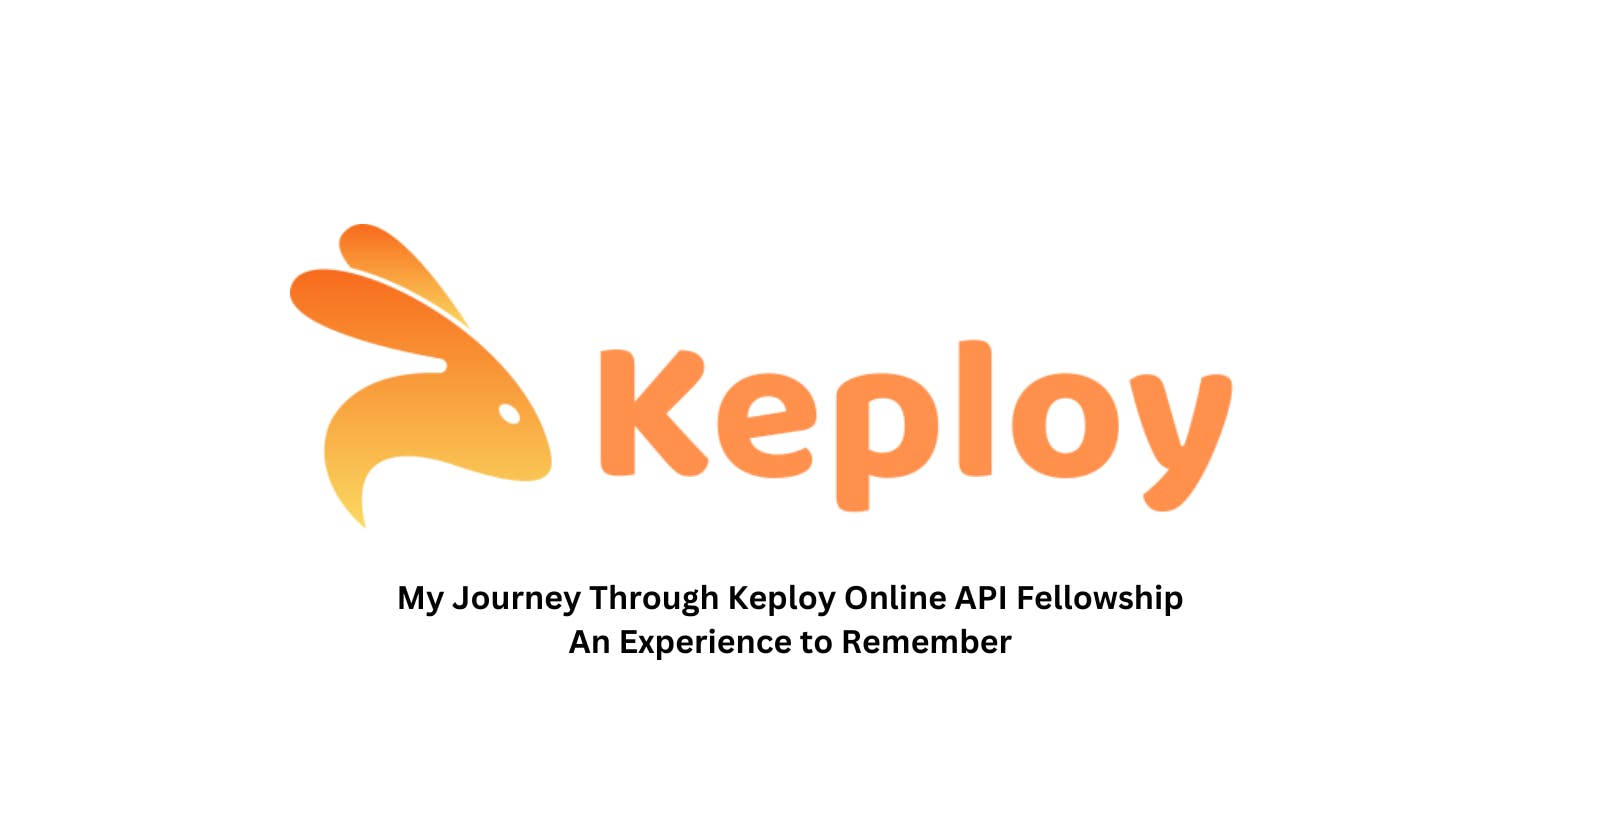 My Journey Through Keploy Online API Fellowship: An Experience to Remember